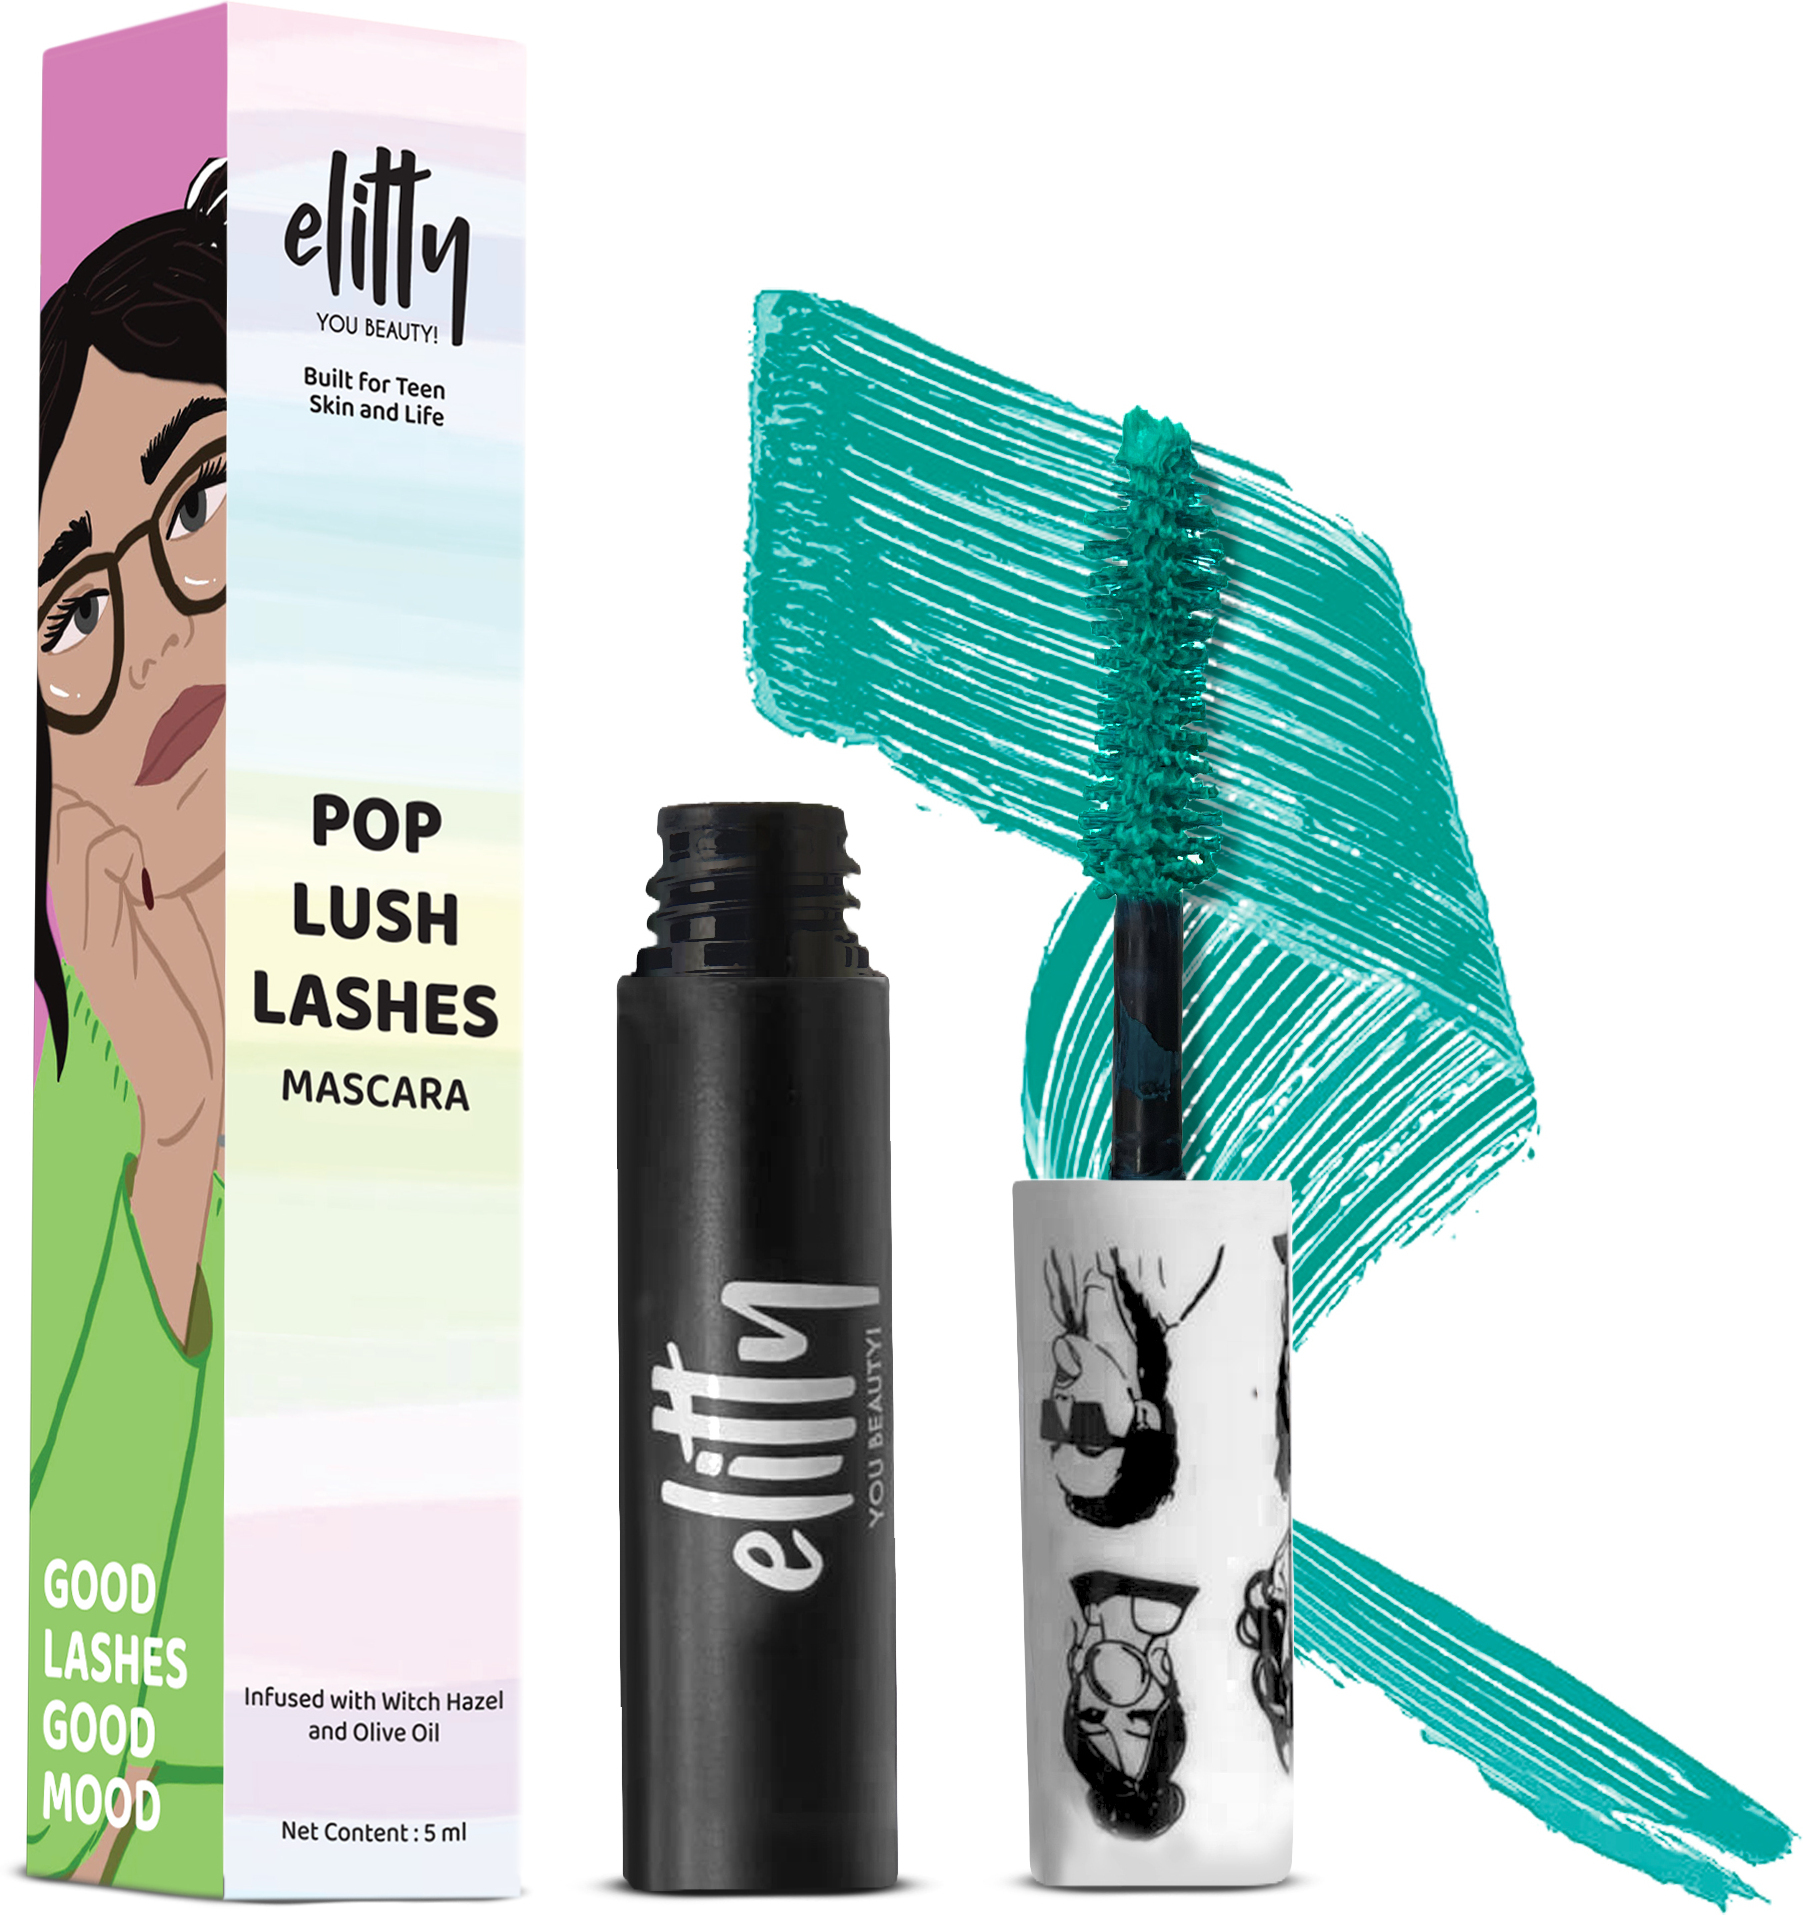 Elitty Pop Colored Lush Lashes Mascara Waterproof, Smudge proof, Curling and lengthening, Turquoise Color, Queen Energy